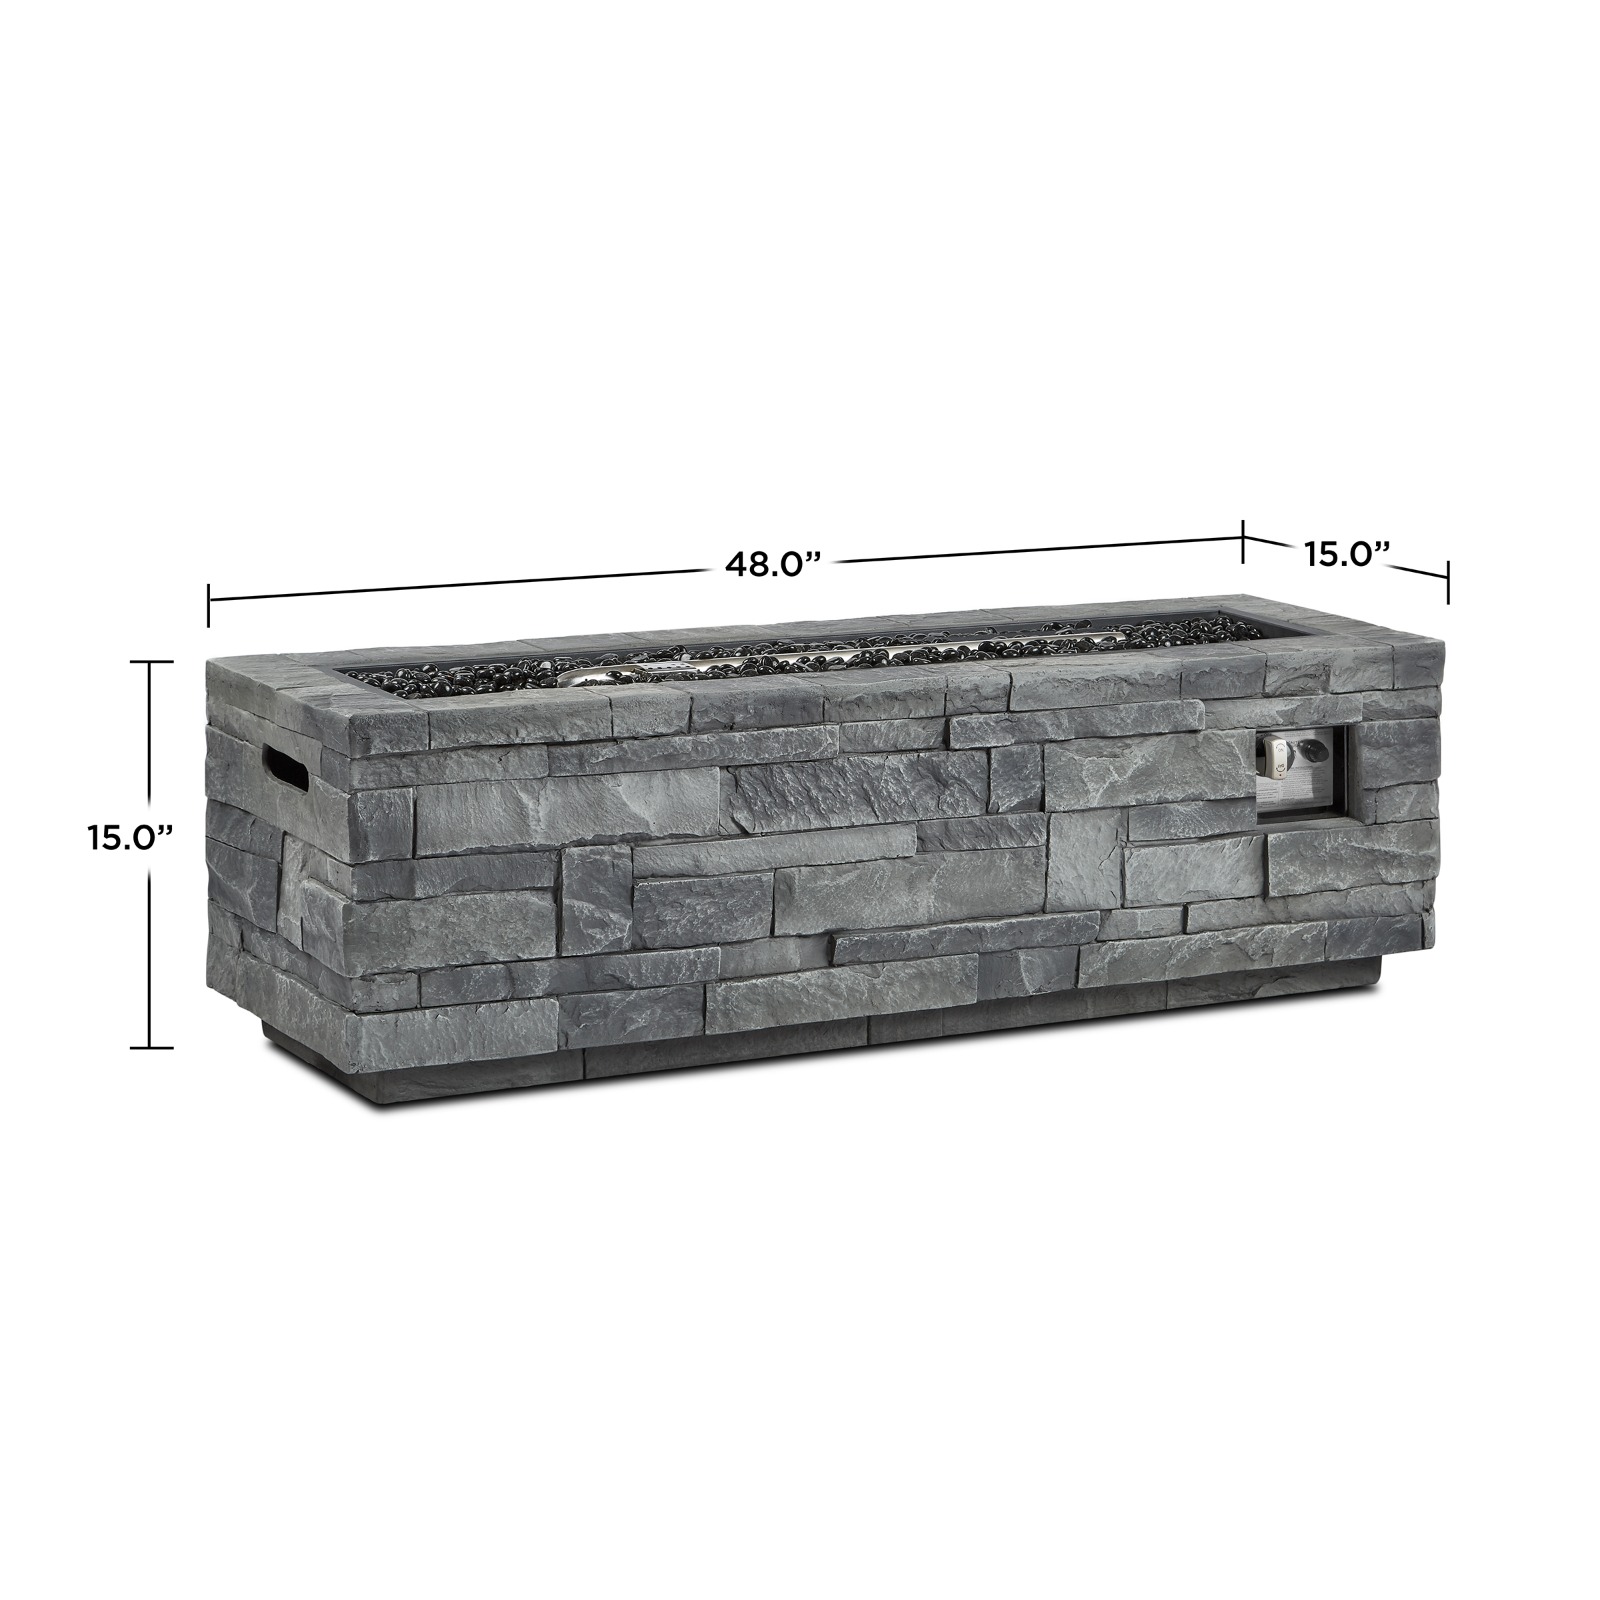 Ledgestone Rectangle Propane Fire Pit Outdoor Fireplace Fire Table for Backyard or Patio Dimensions